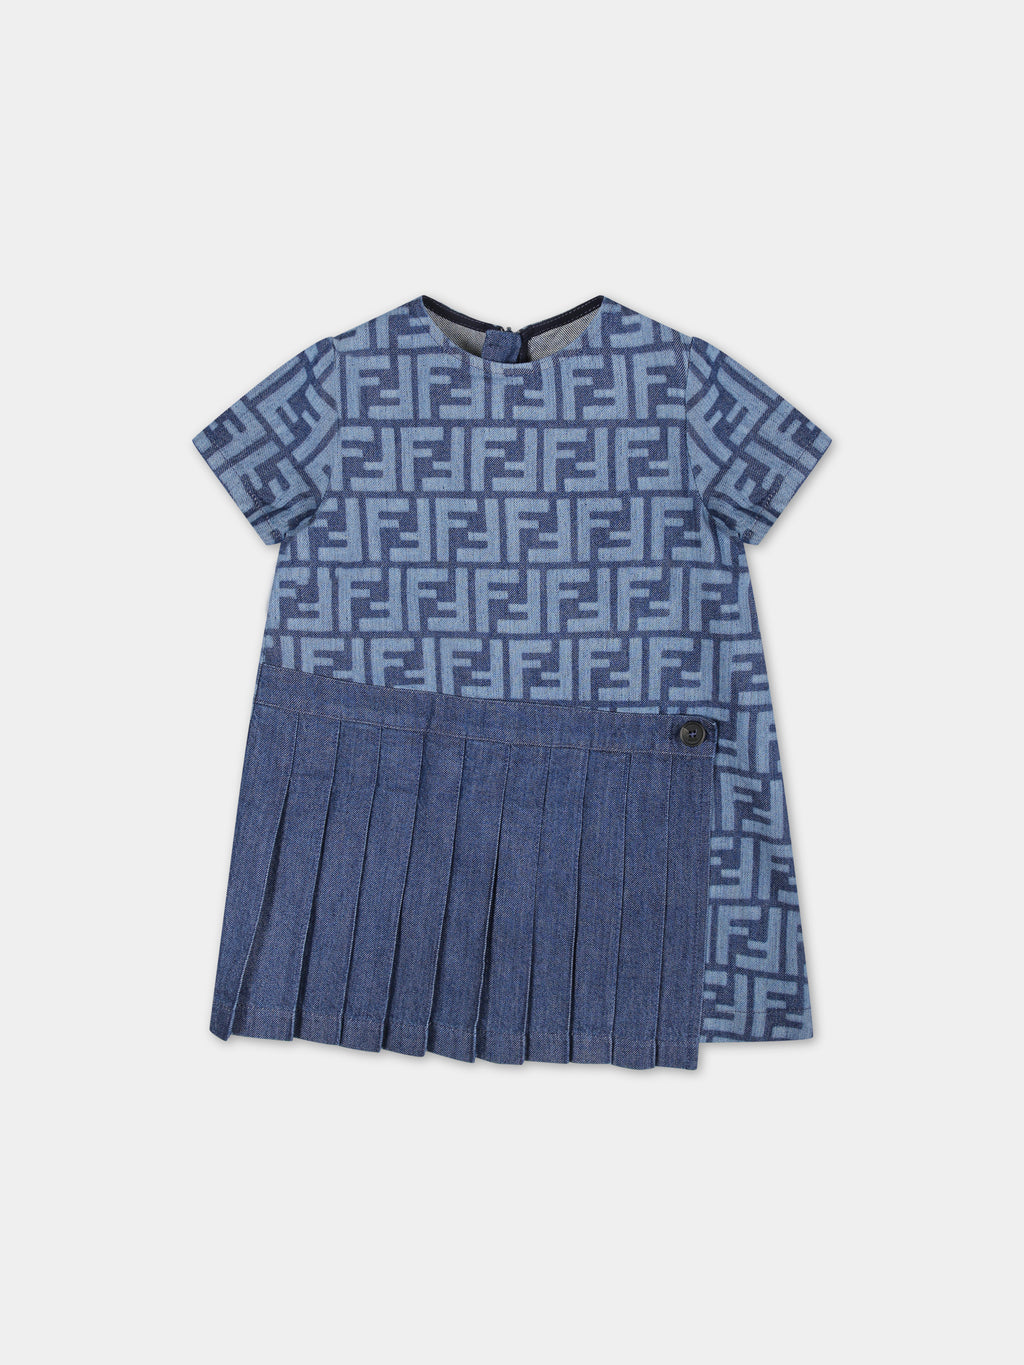 Denim dress for baby girl with all-over iconic FF